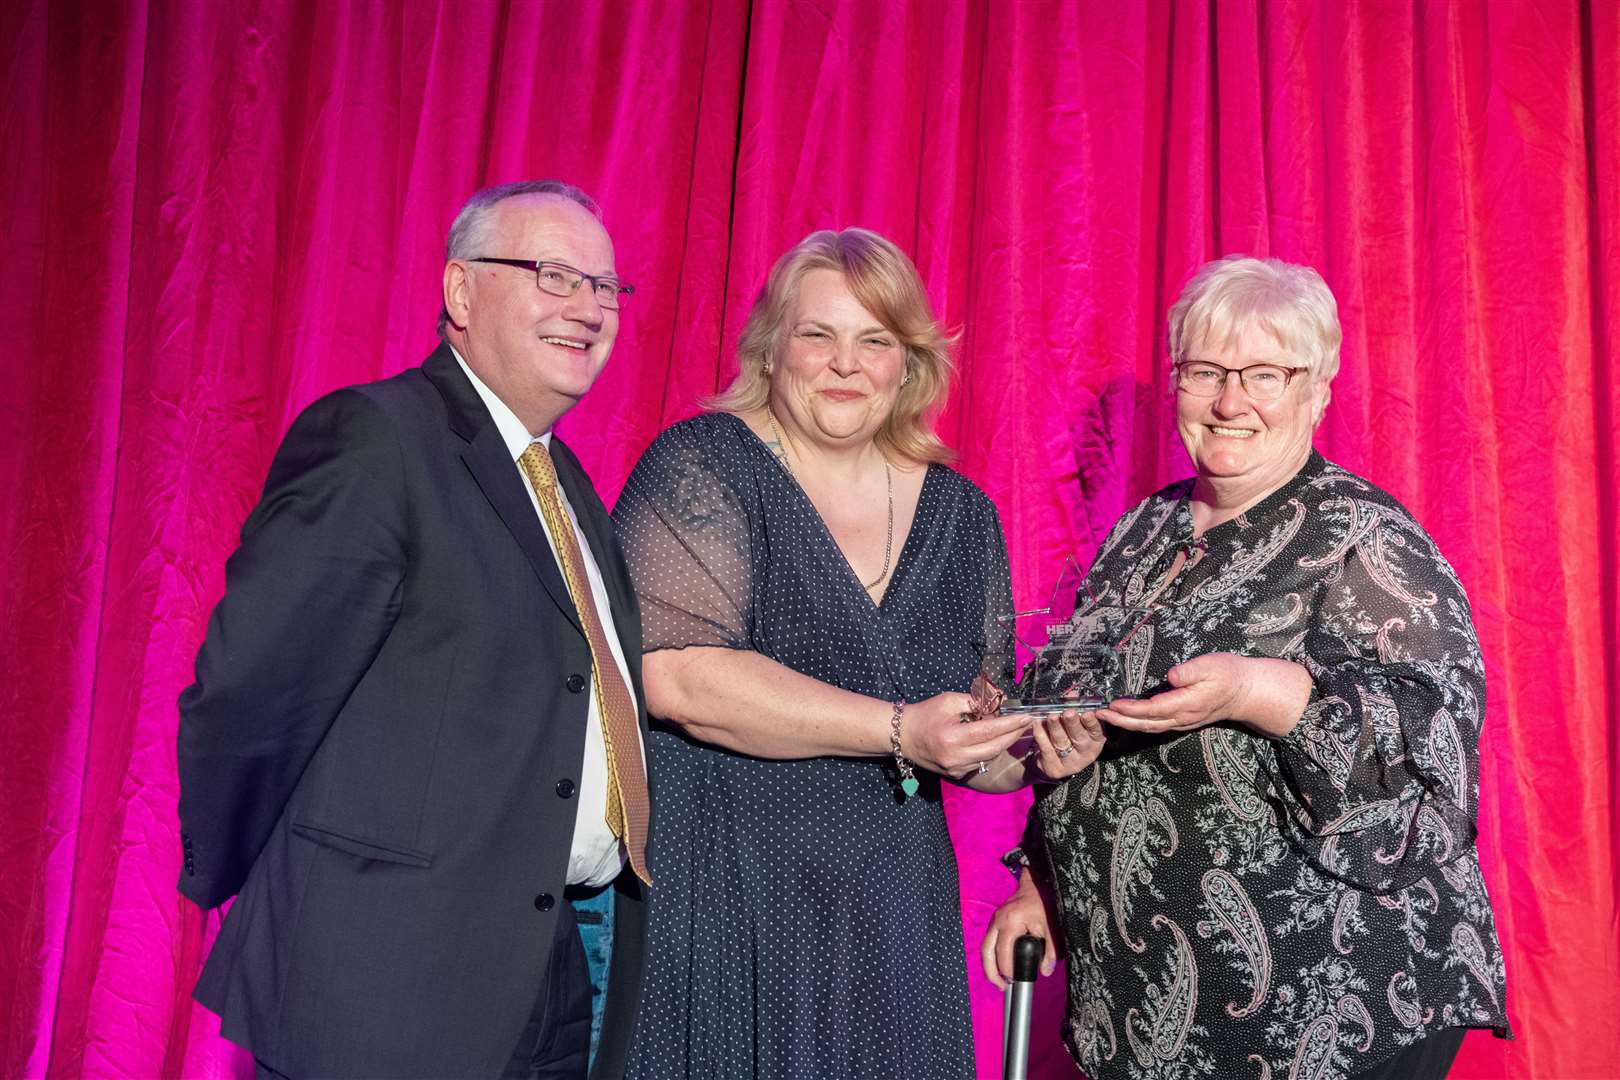 Meg Jamieson and Gifford Leslie from Buckie's Roots have plenty to smile about after the group won the Community Champion of the Year award, presented by Roz Cassidy, HR Manager of Walker's Shortbread. Picture: Beth Taylor